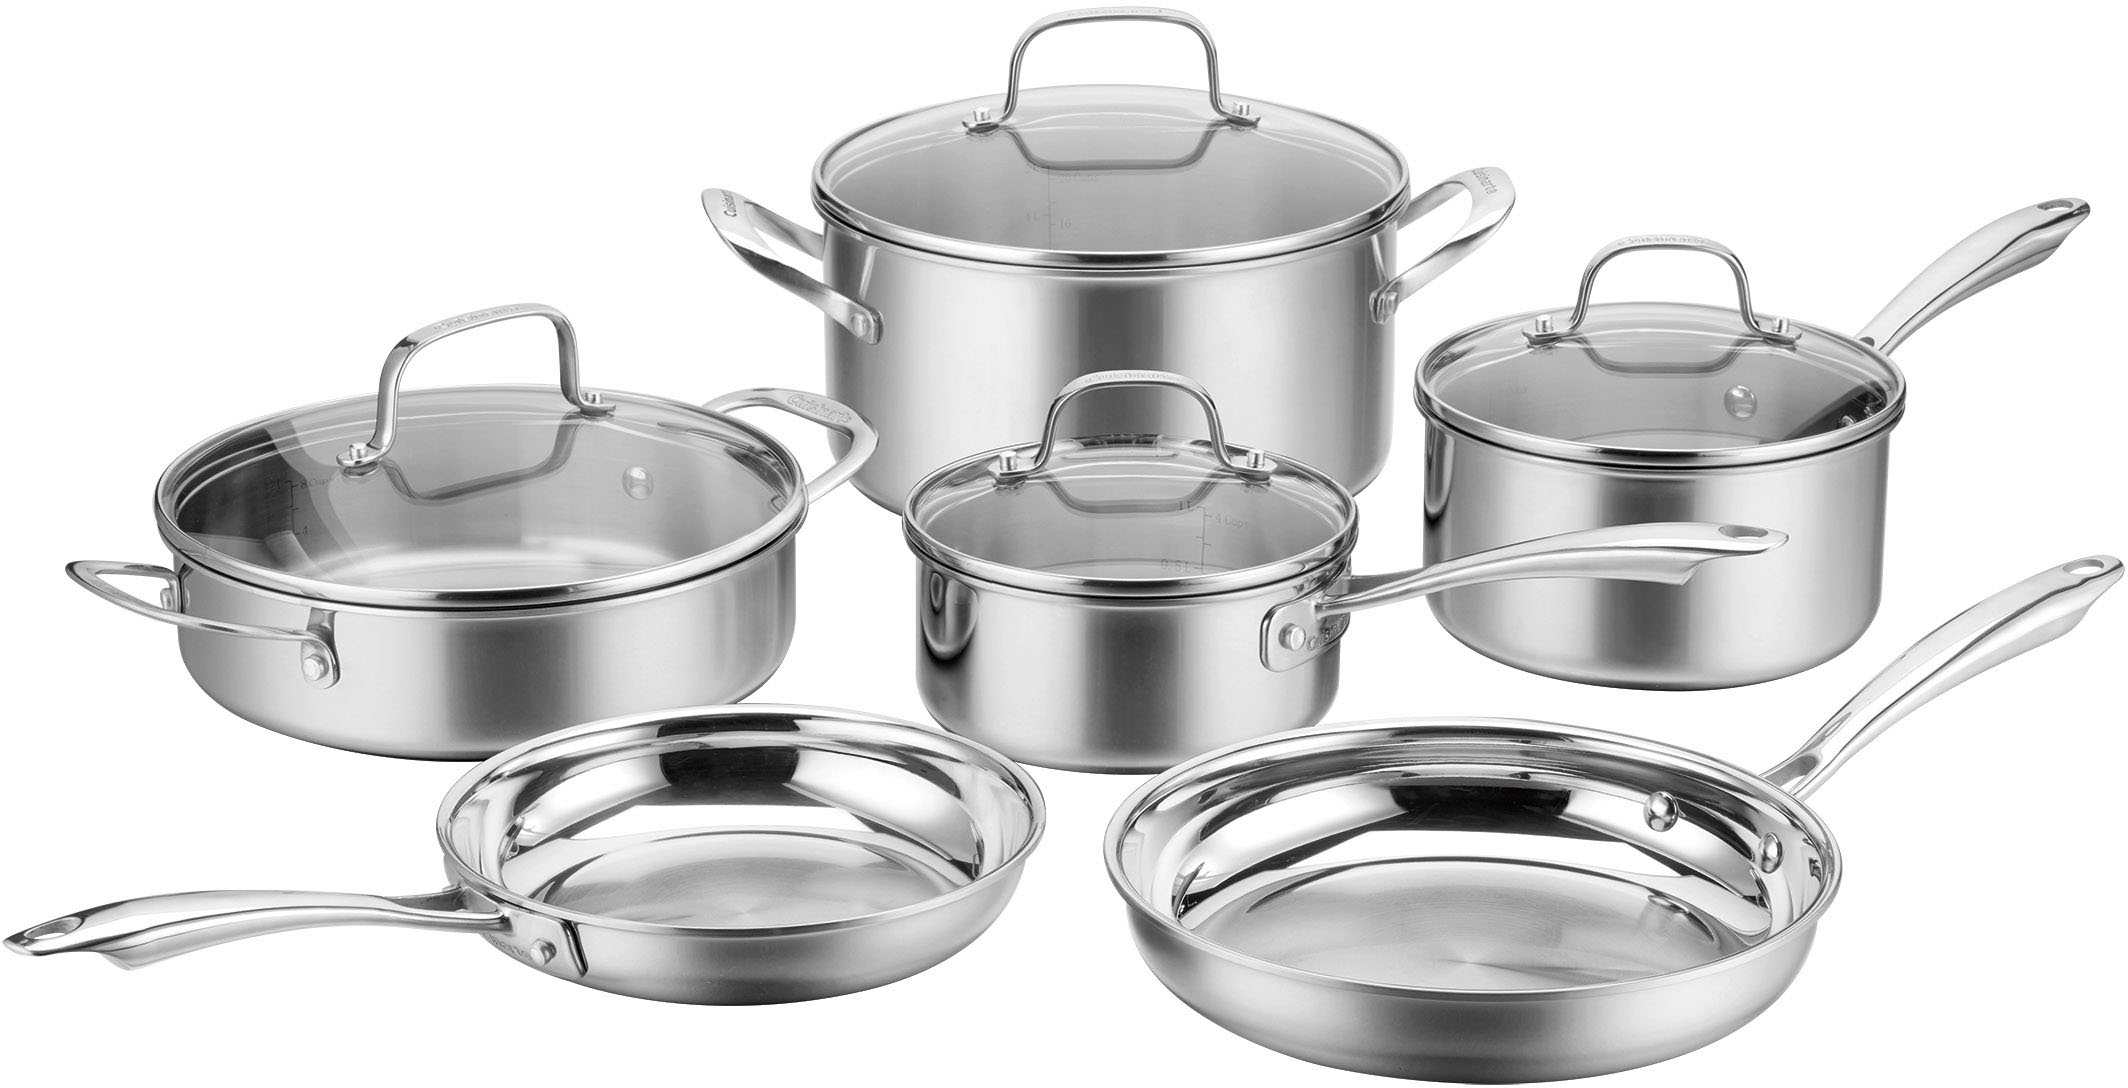 Cuisinart - Classic Tri-Ply 10-Piece Cookware Set - Stainless Steel